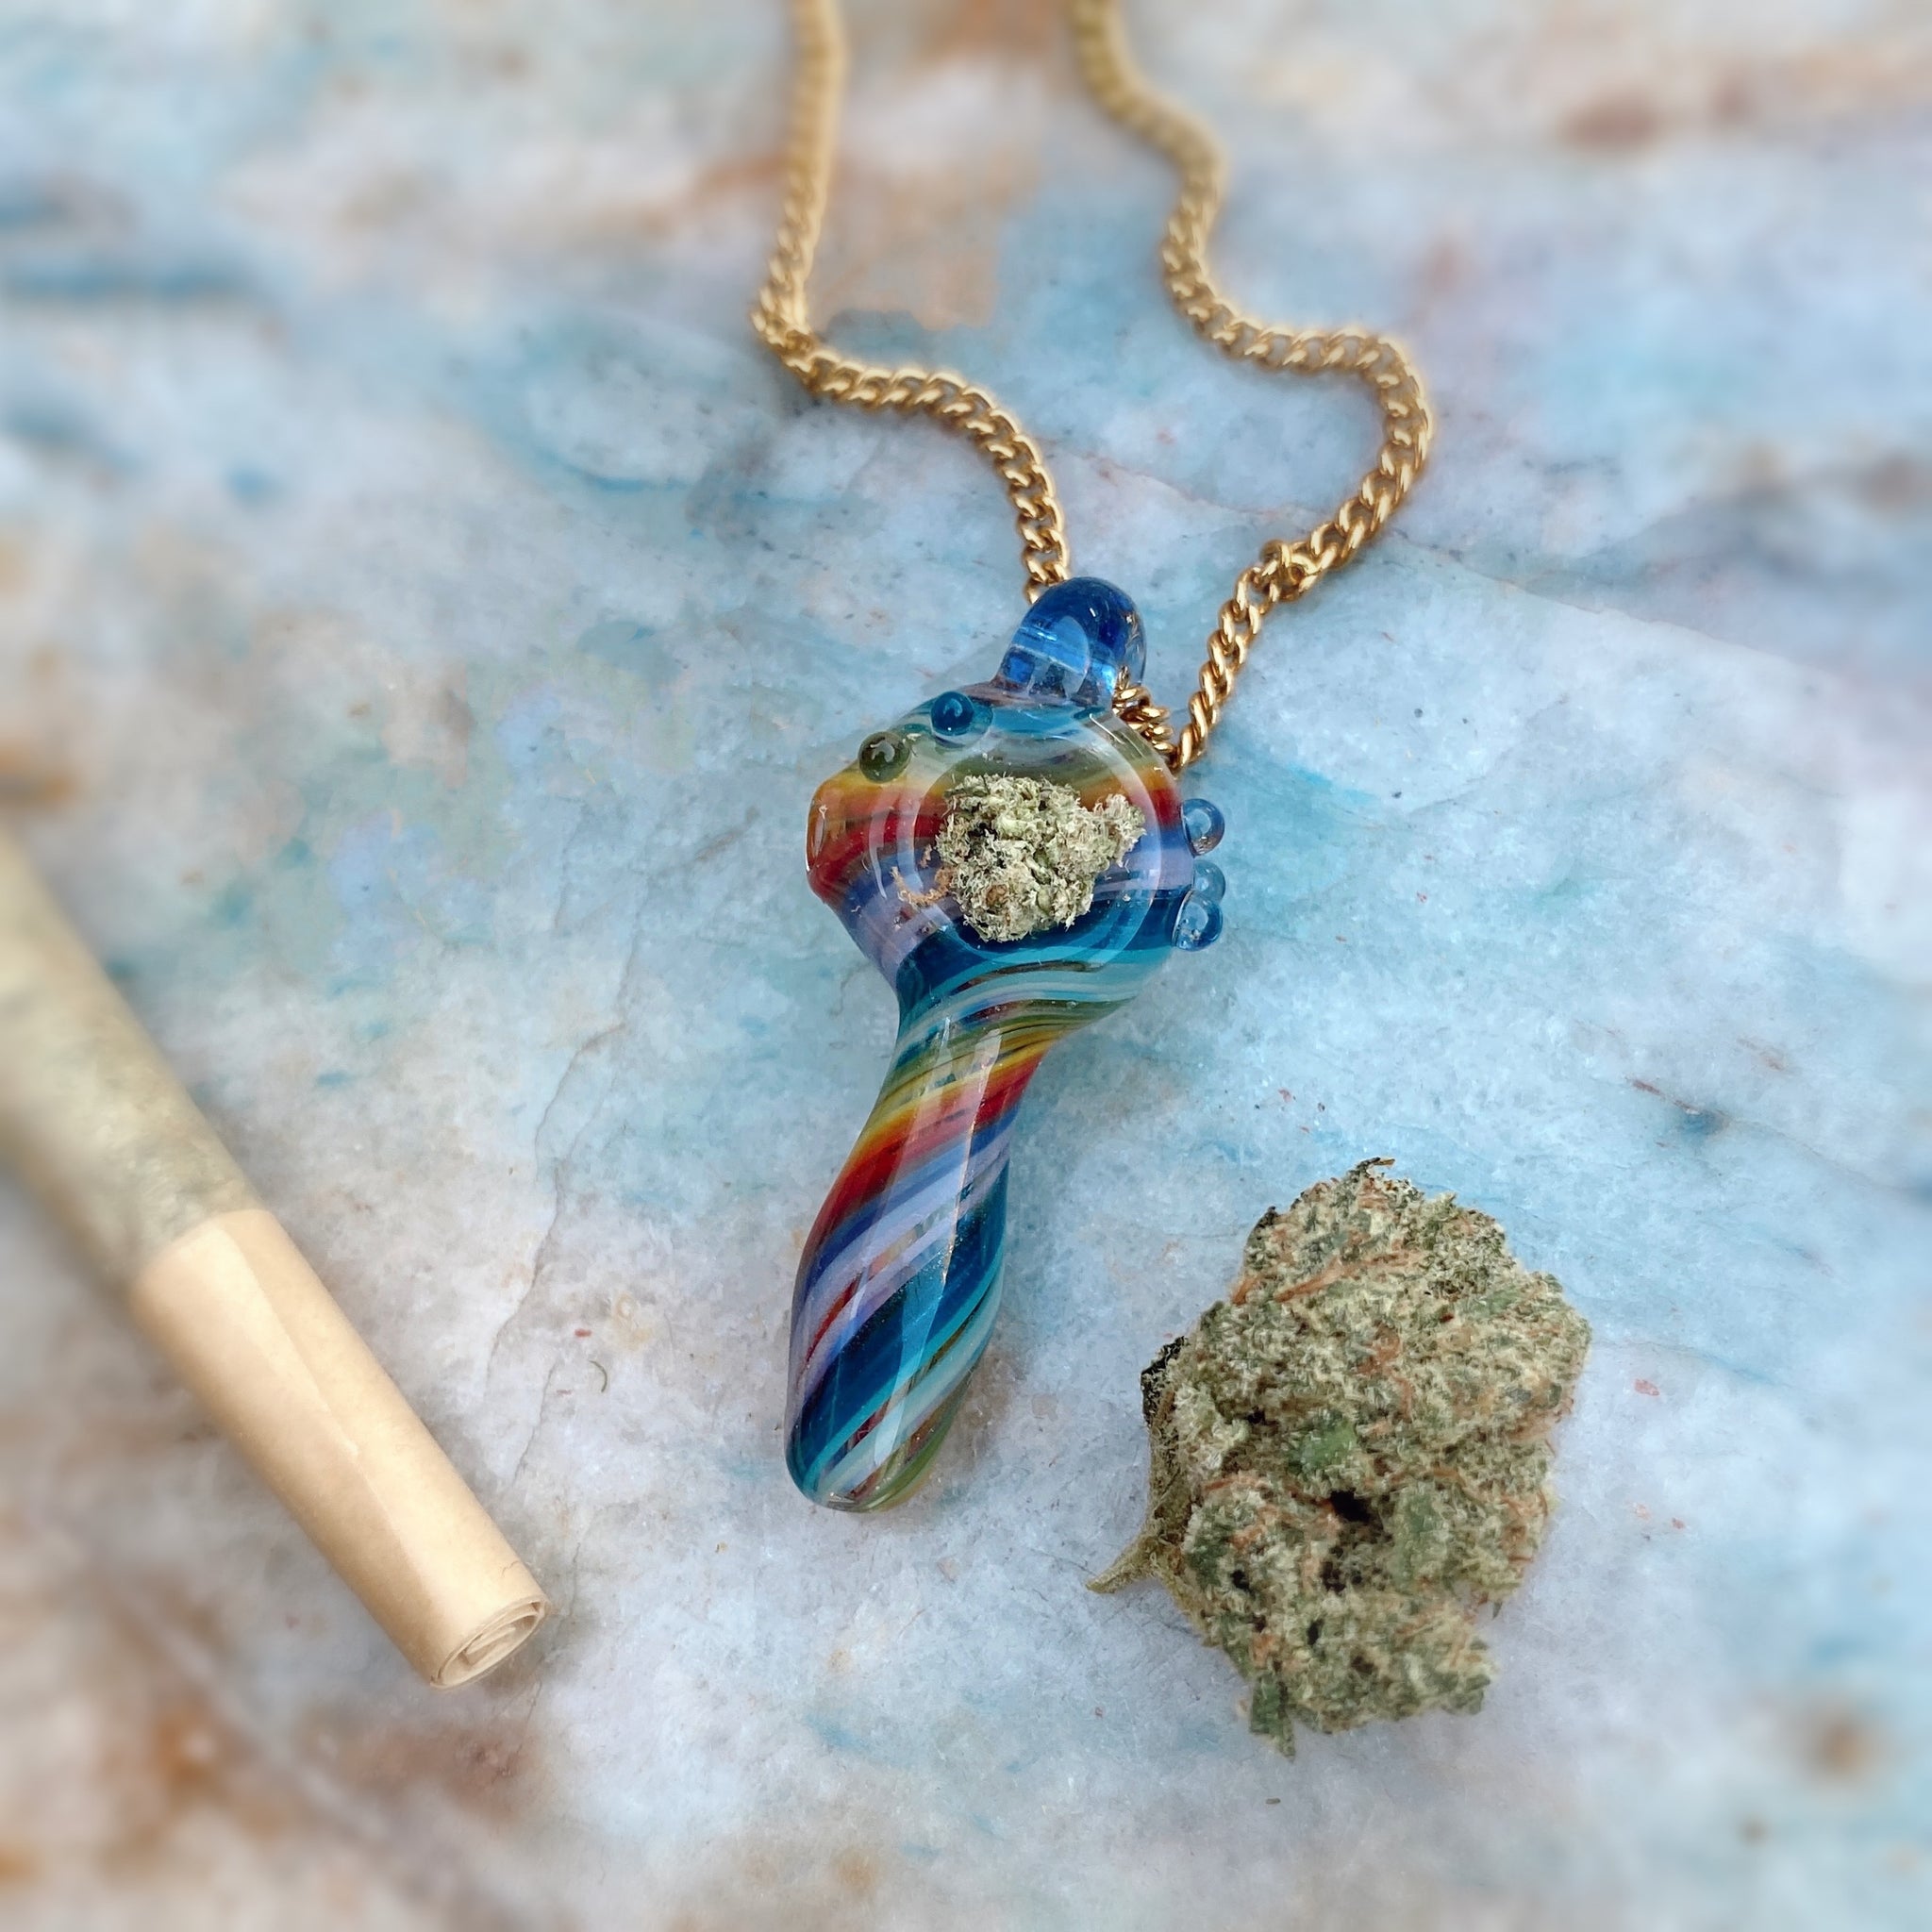 rainbow weed pipes